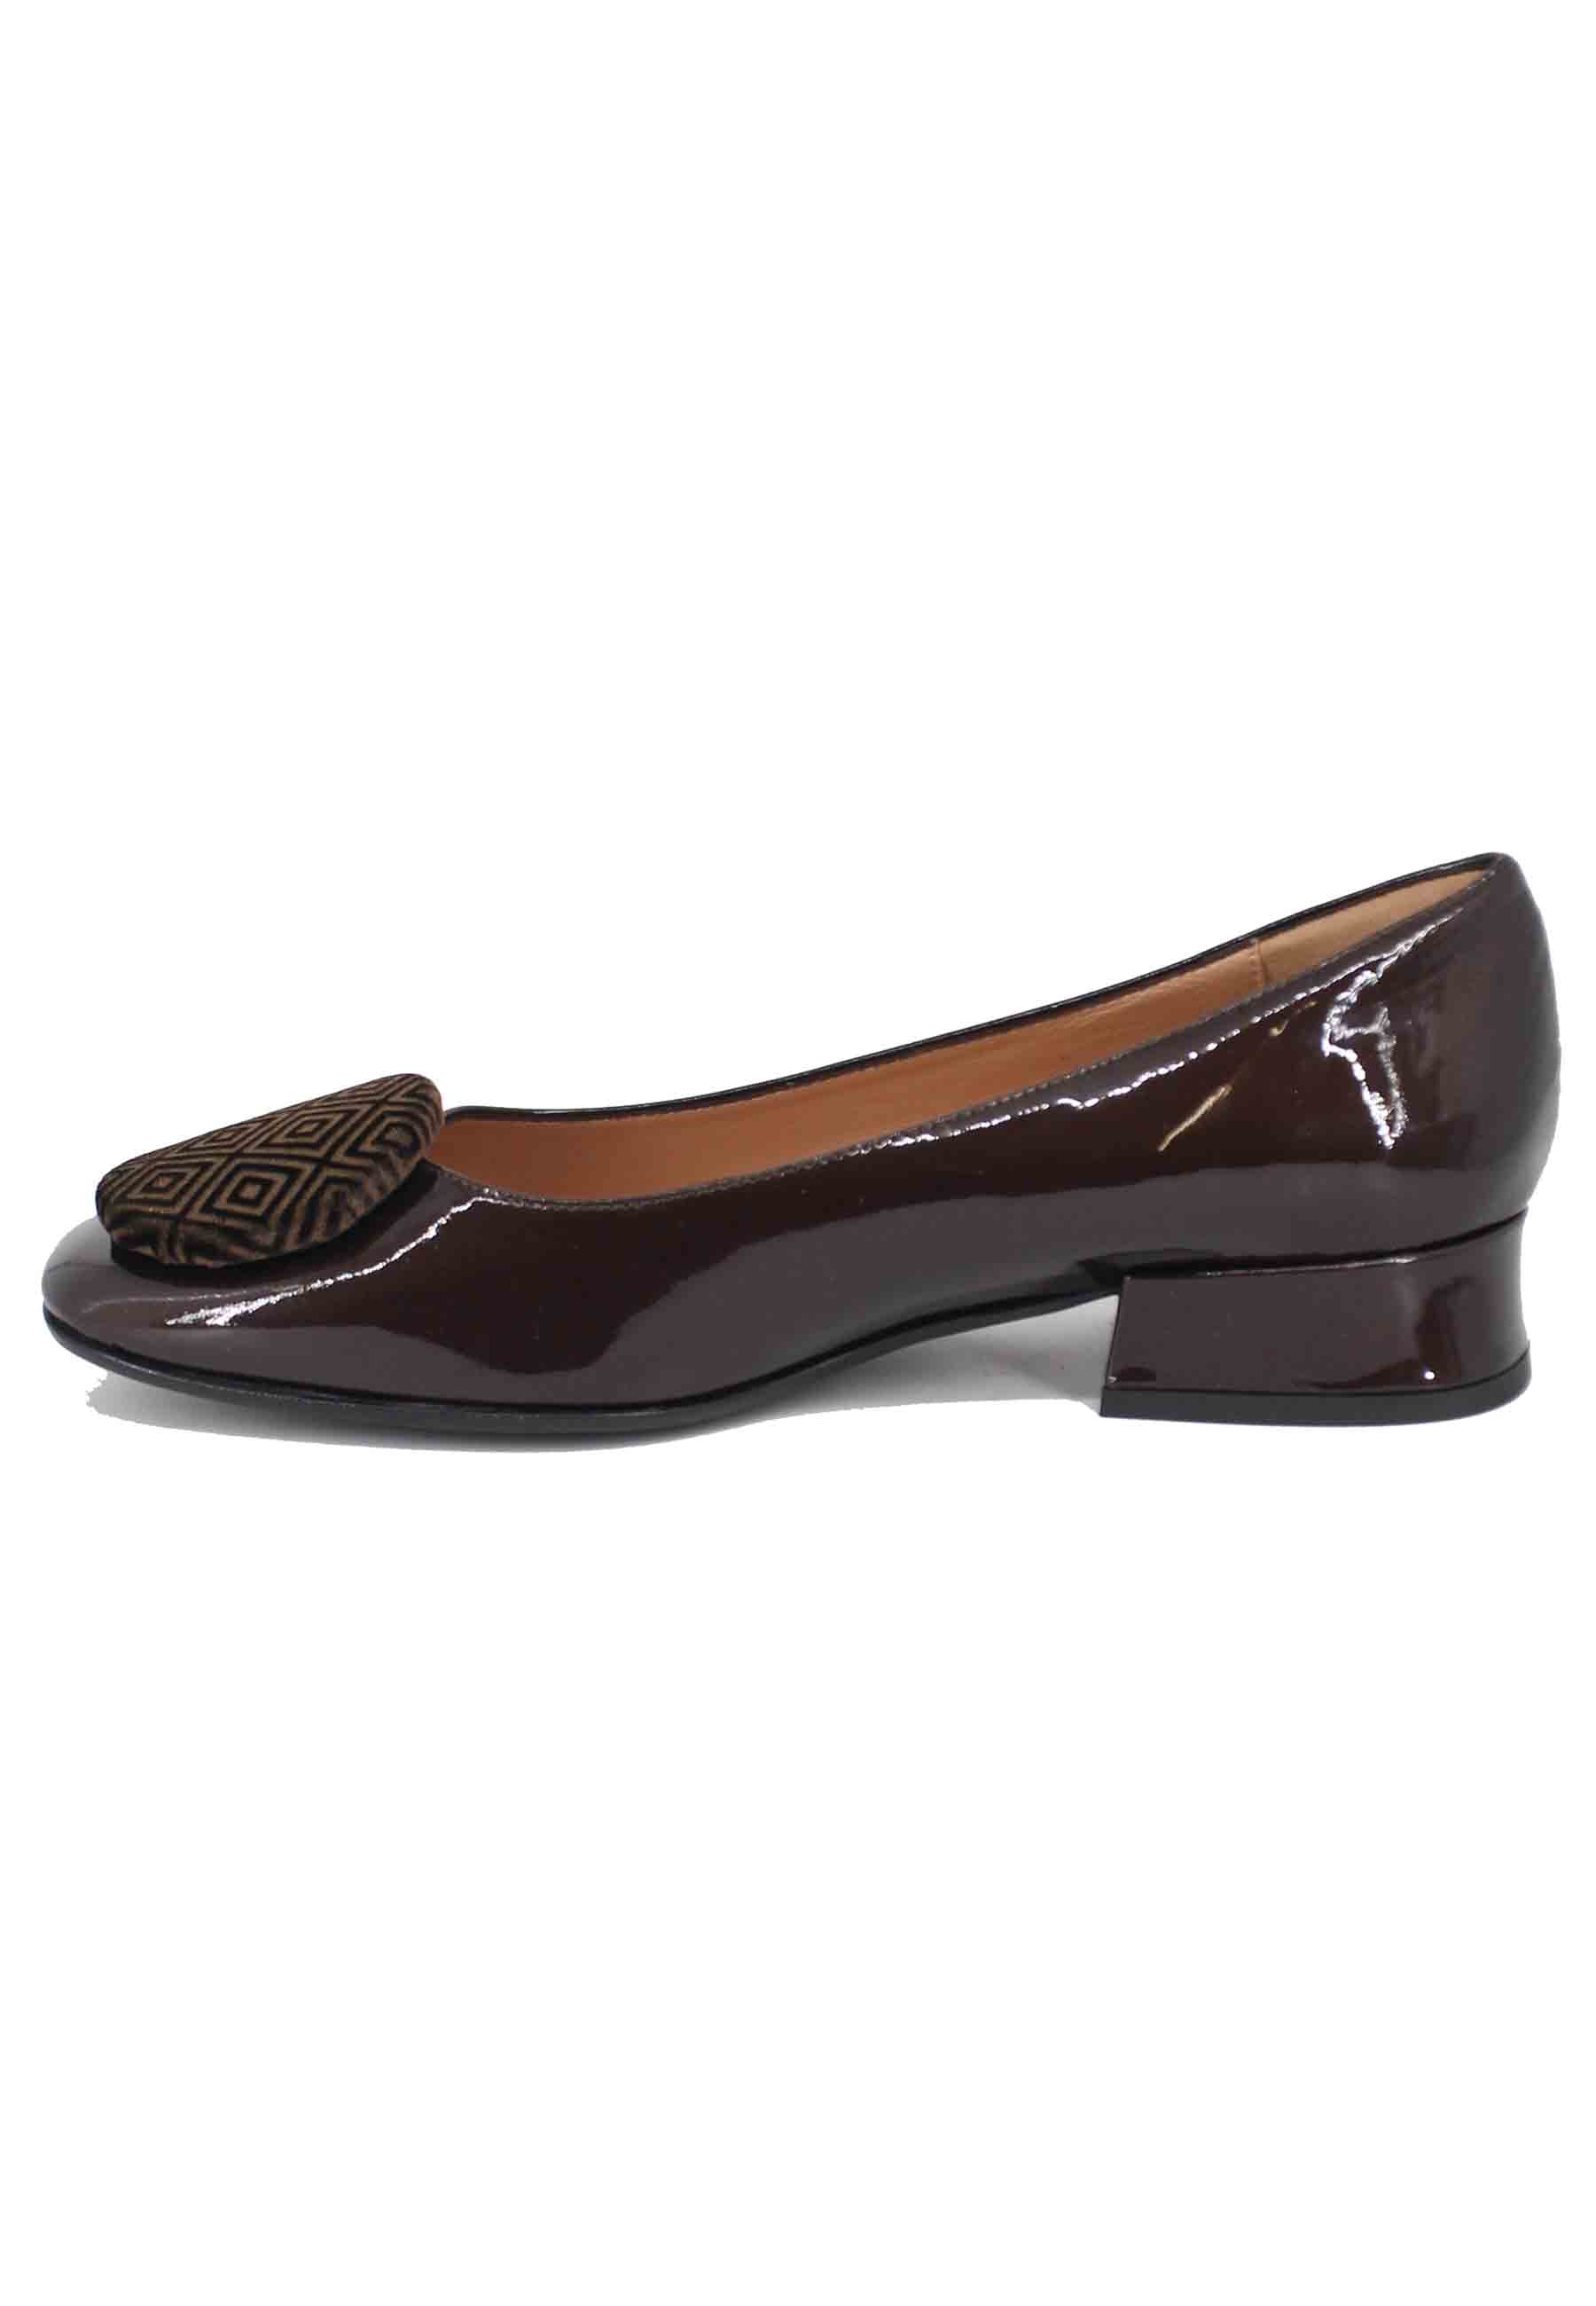 Women's dark brown leather ballet flats with suede accessory